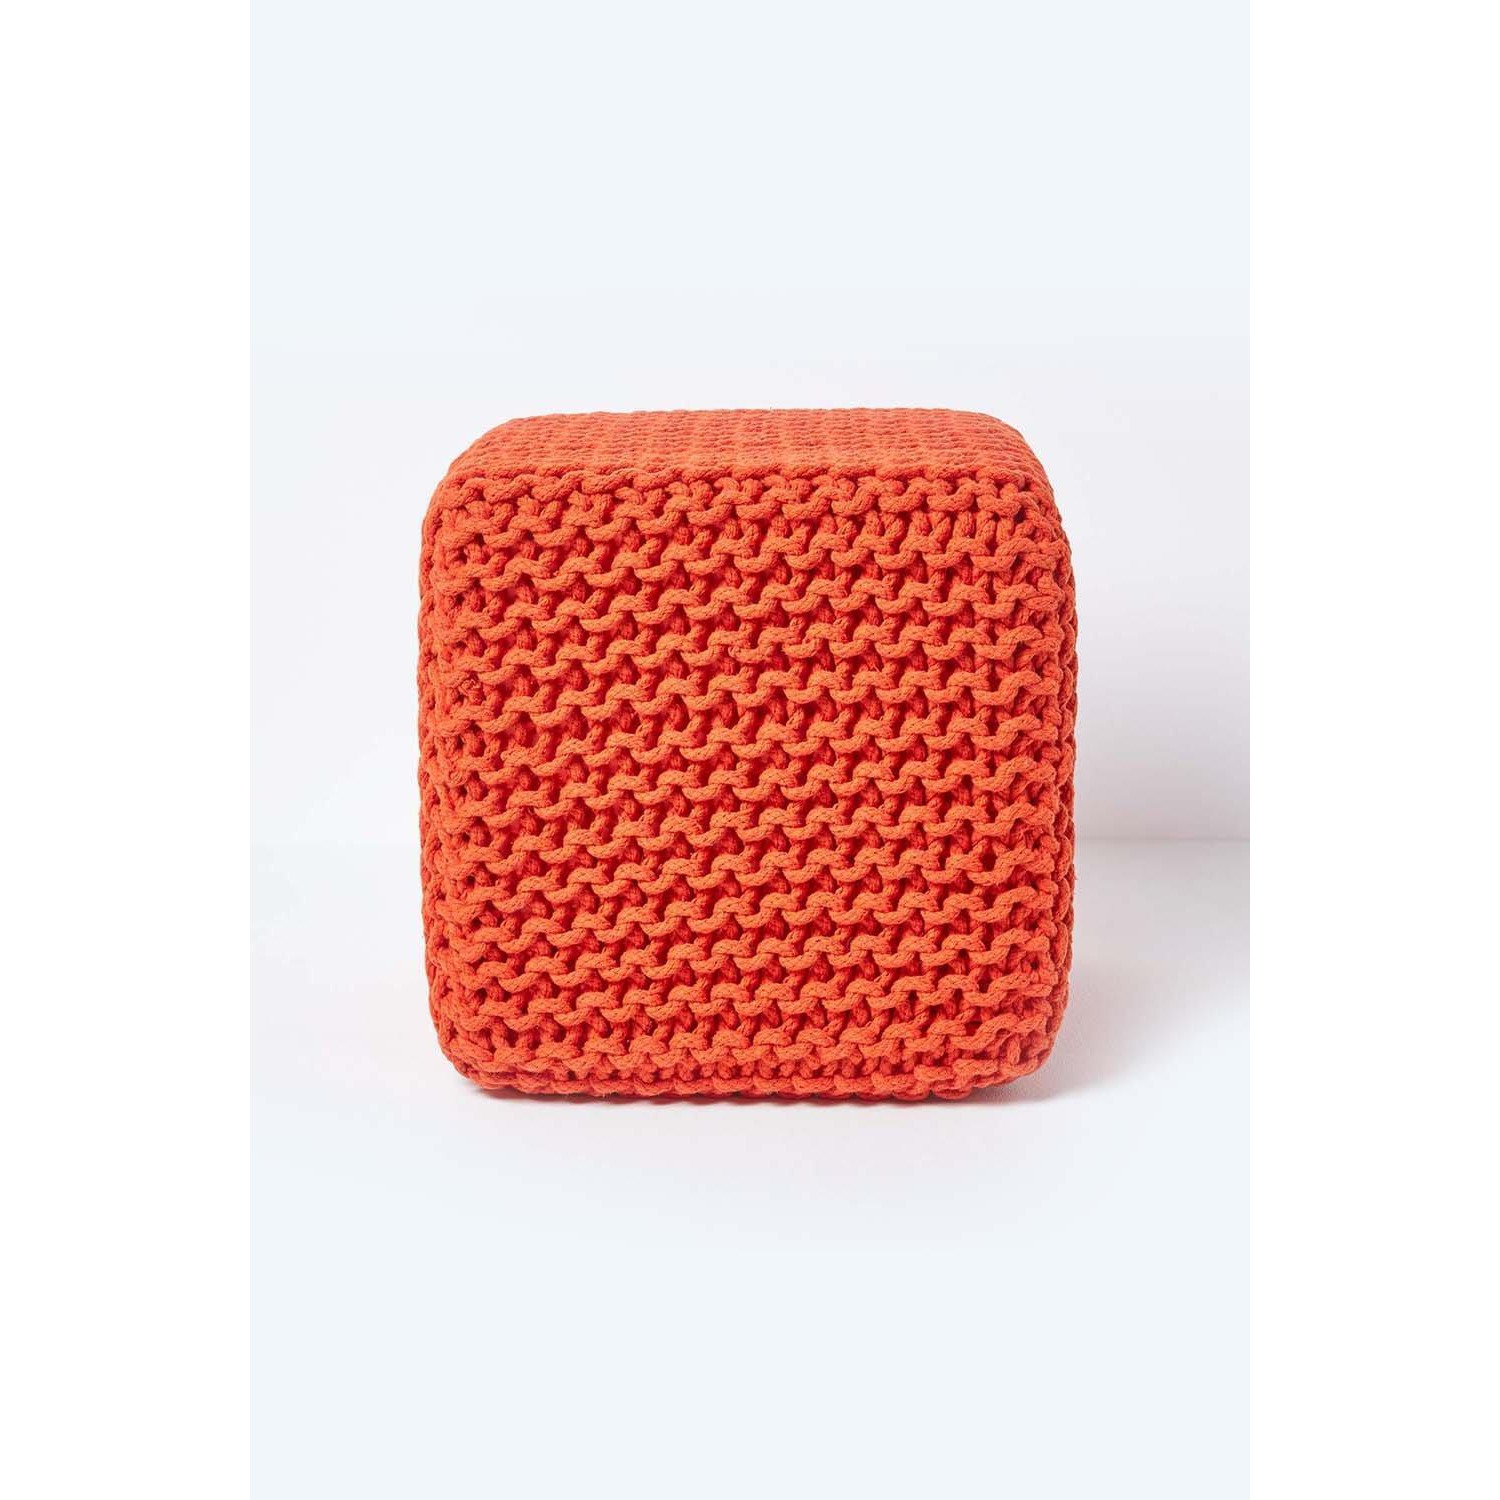 Cube Cotton Knitted Pouffe Footstool - image 1